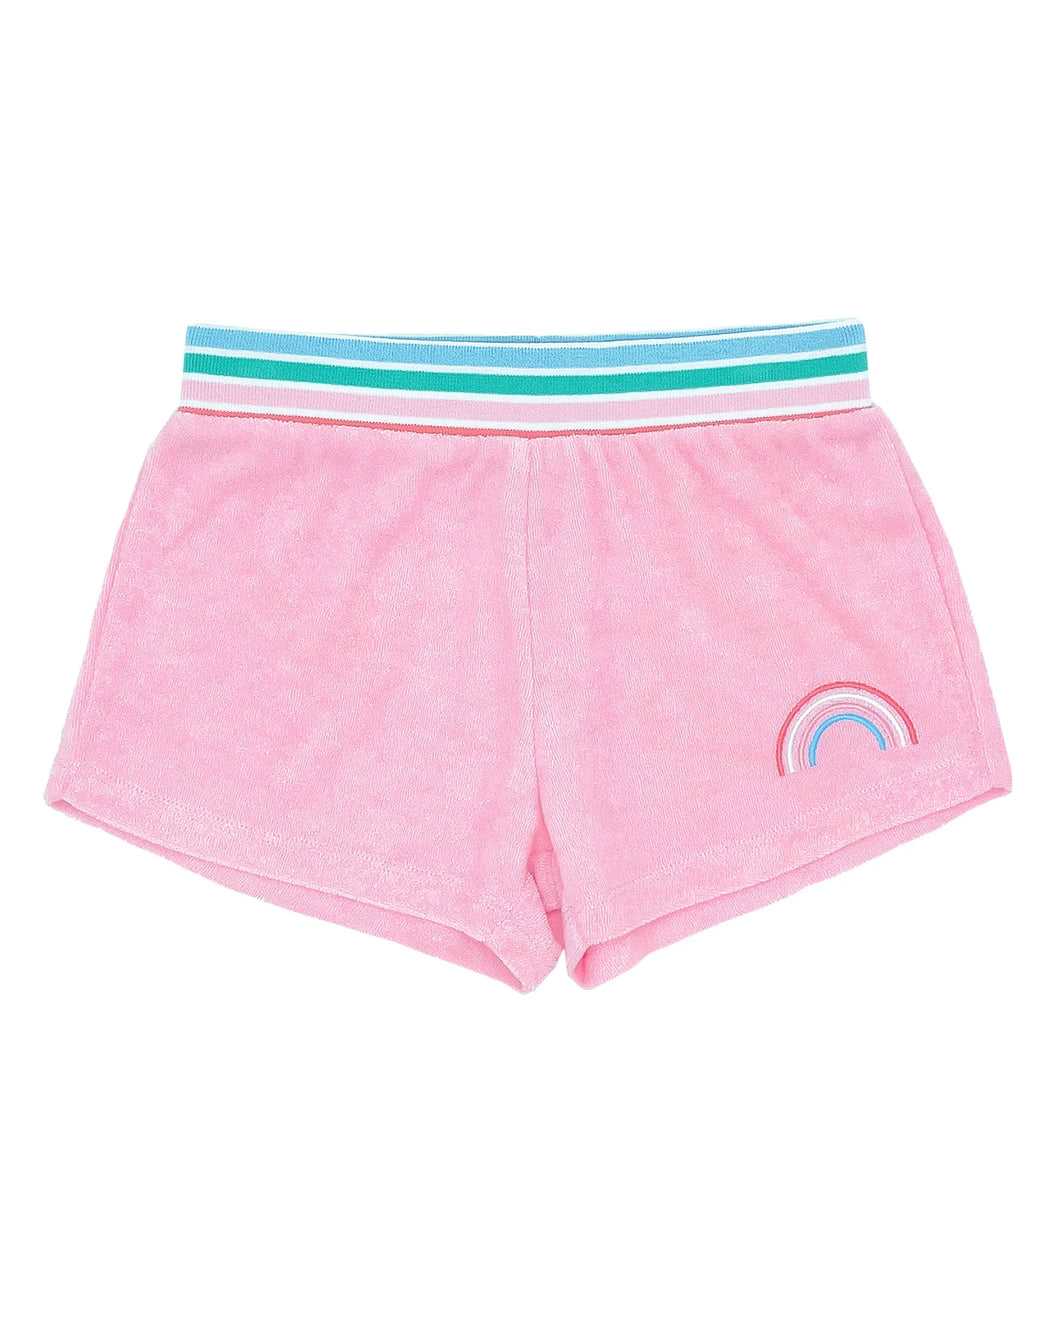 Feather 4 Arrow- Rivi Terry Shorts (Fairy Tale Pink, 2-6)